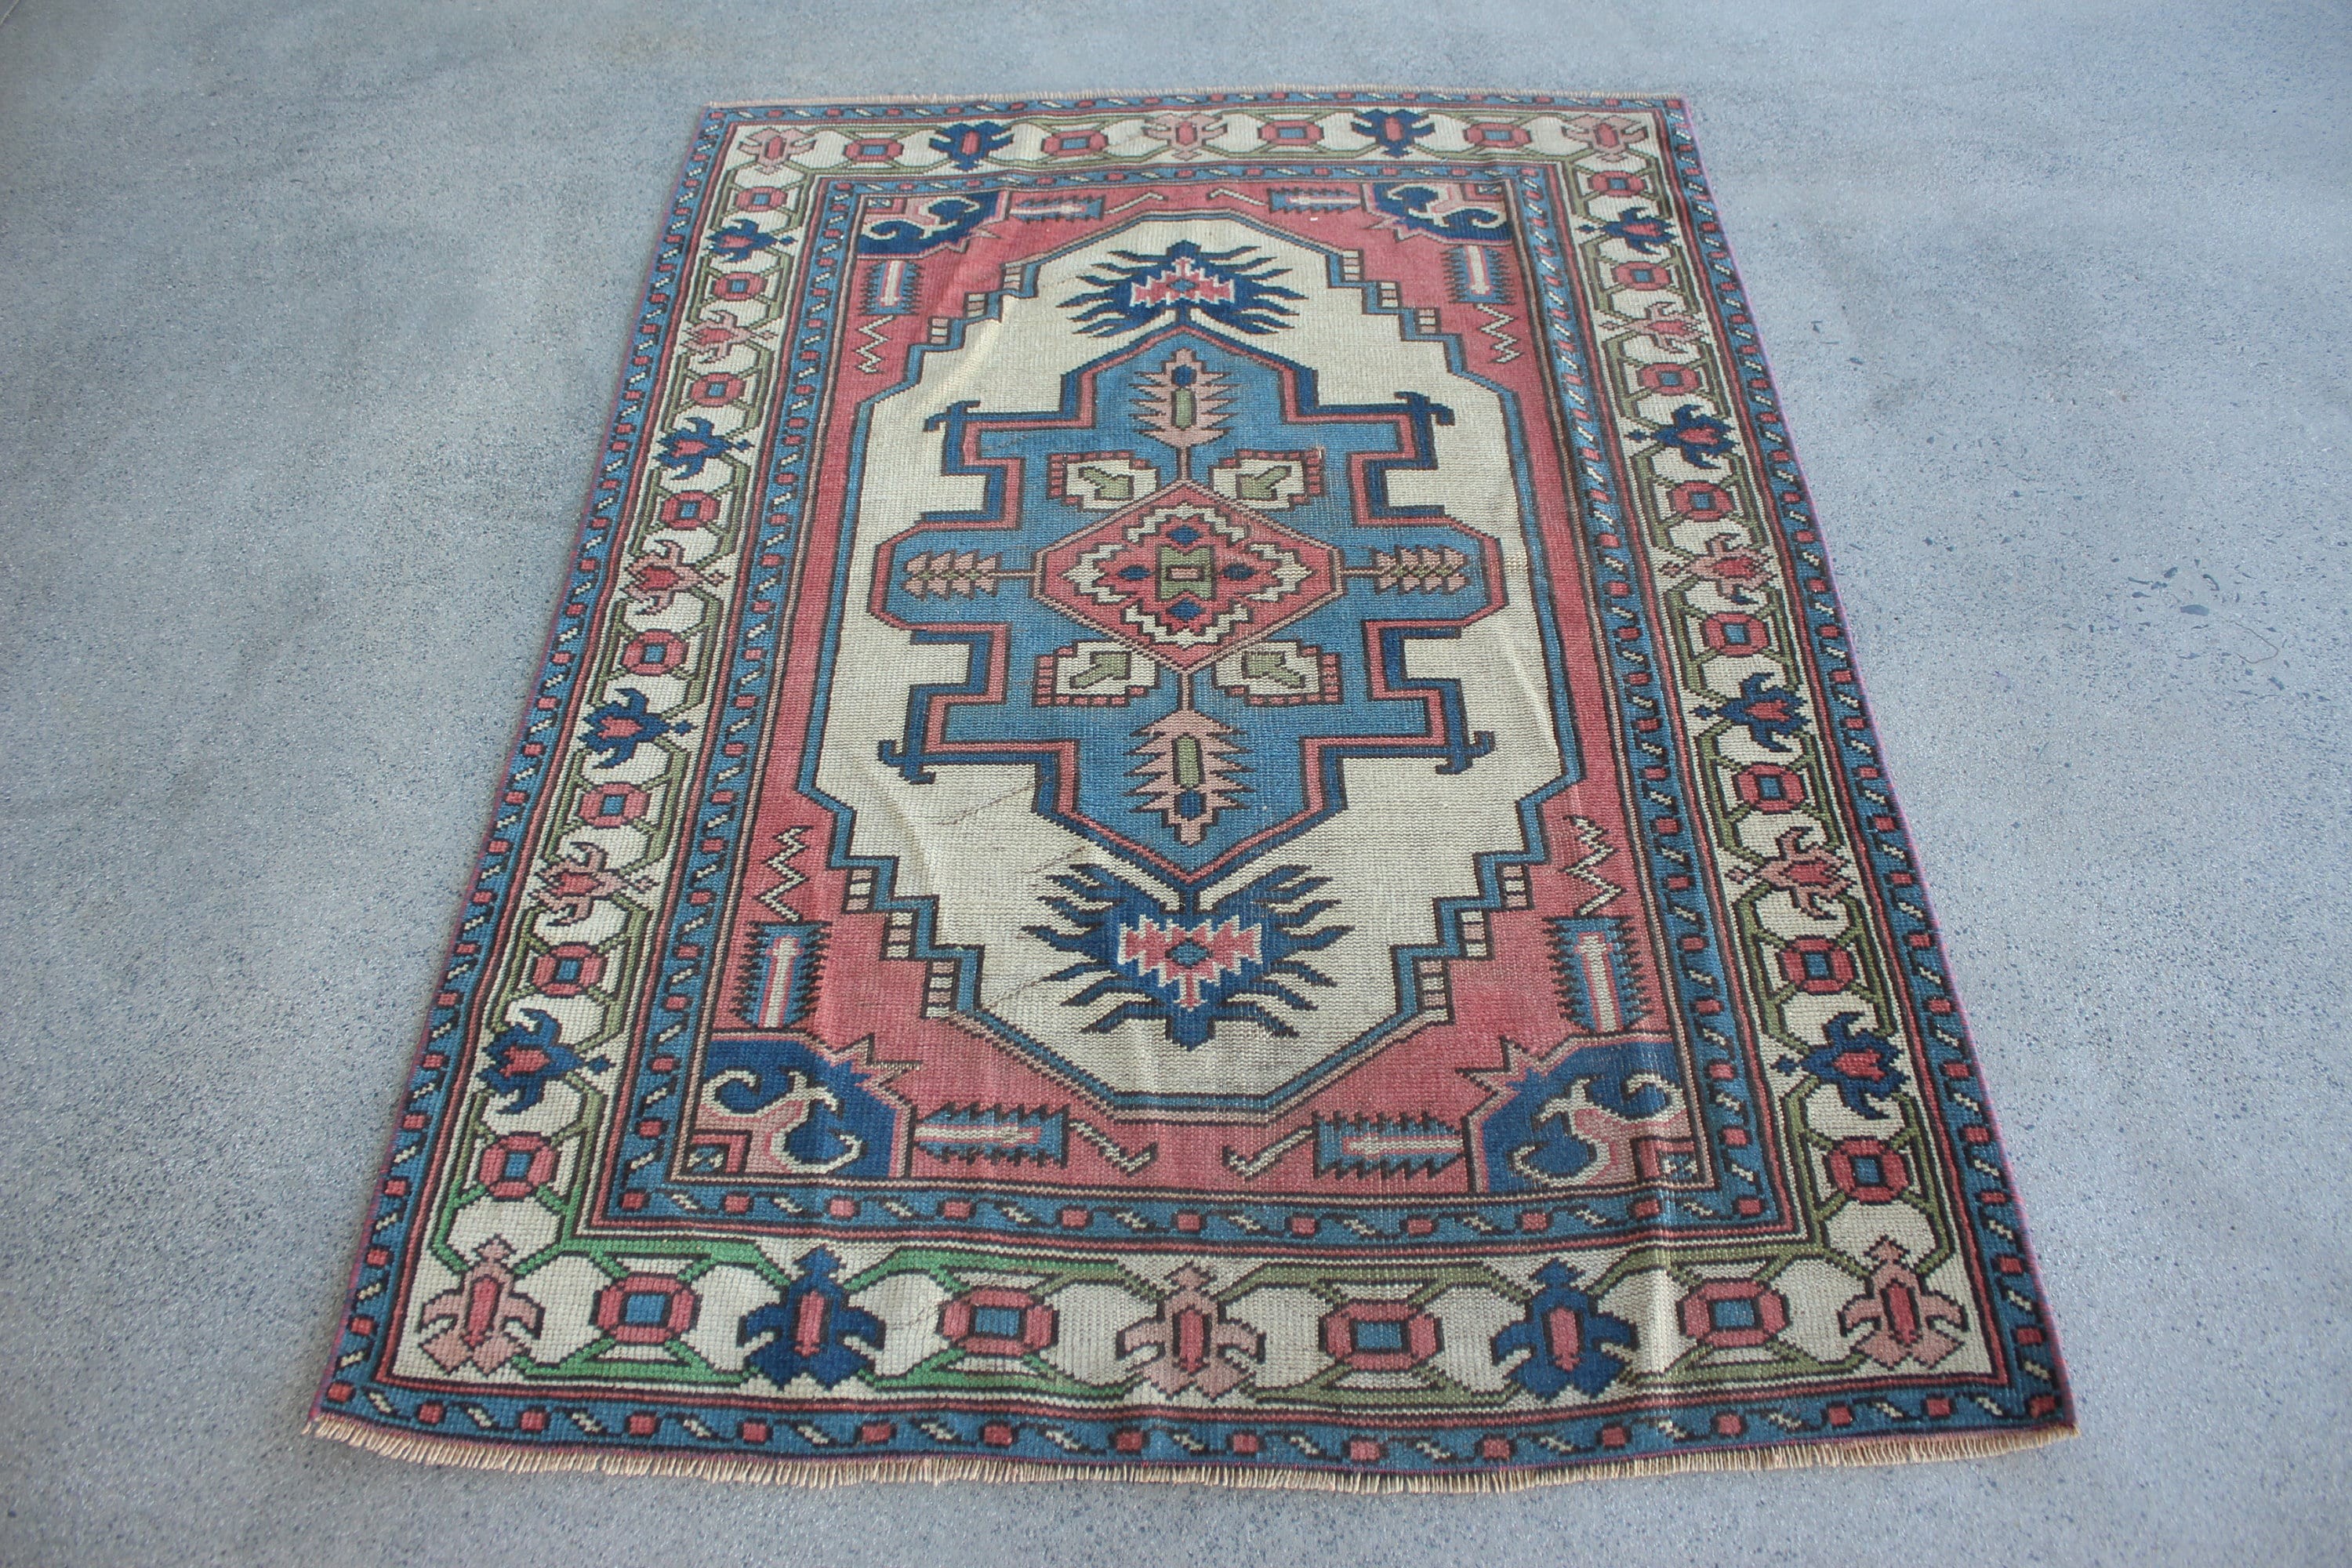 Blue Cool Rug, Entry Rug, 4x5.6 ft Accent Rug, Turkish Rugs, Oriental Rug, Aesthetic Rug, Vintage Rugs, Rugs for Bedroom, Kitchen Rug